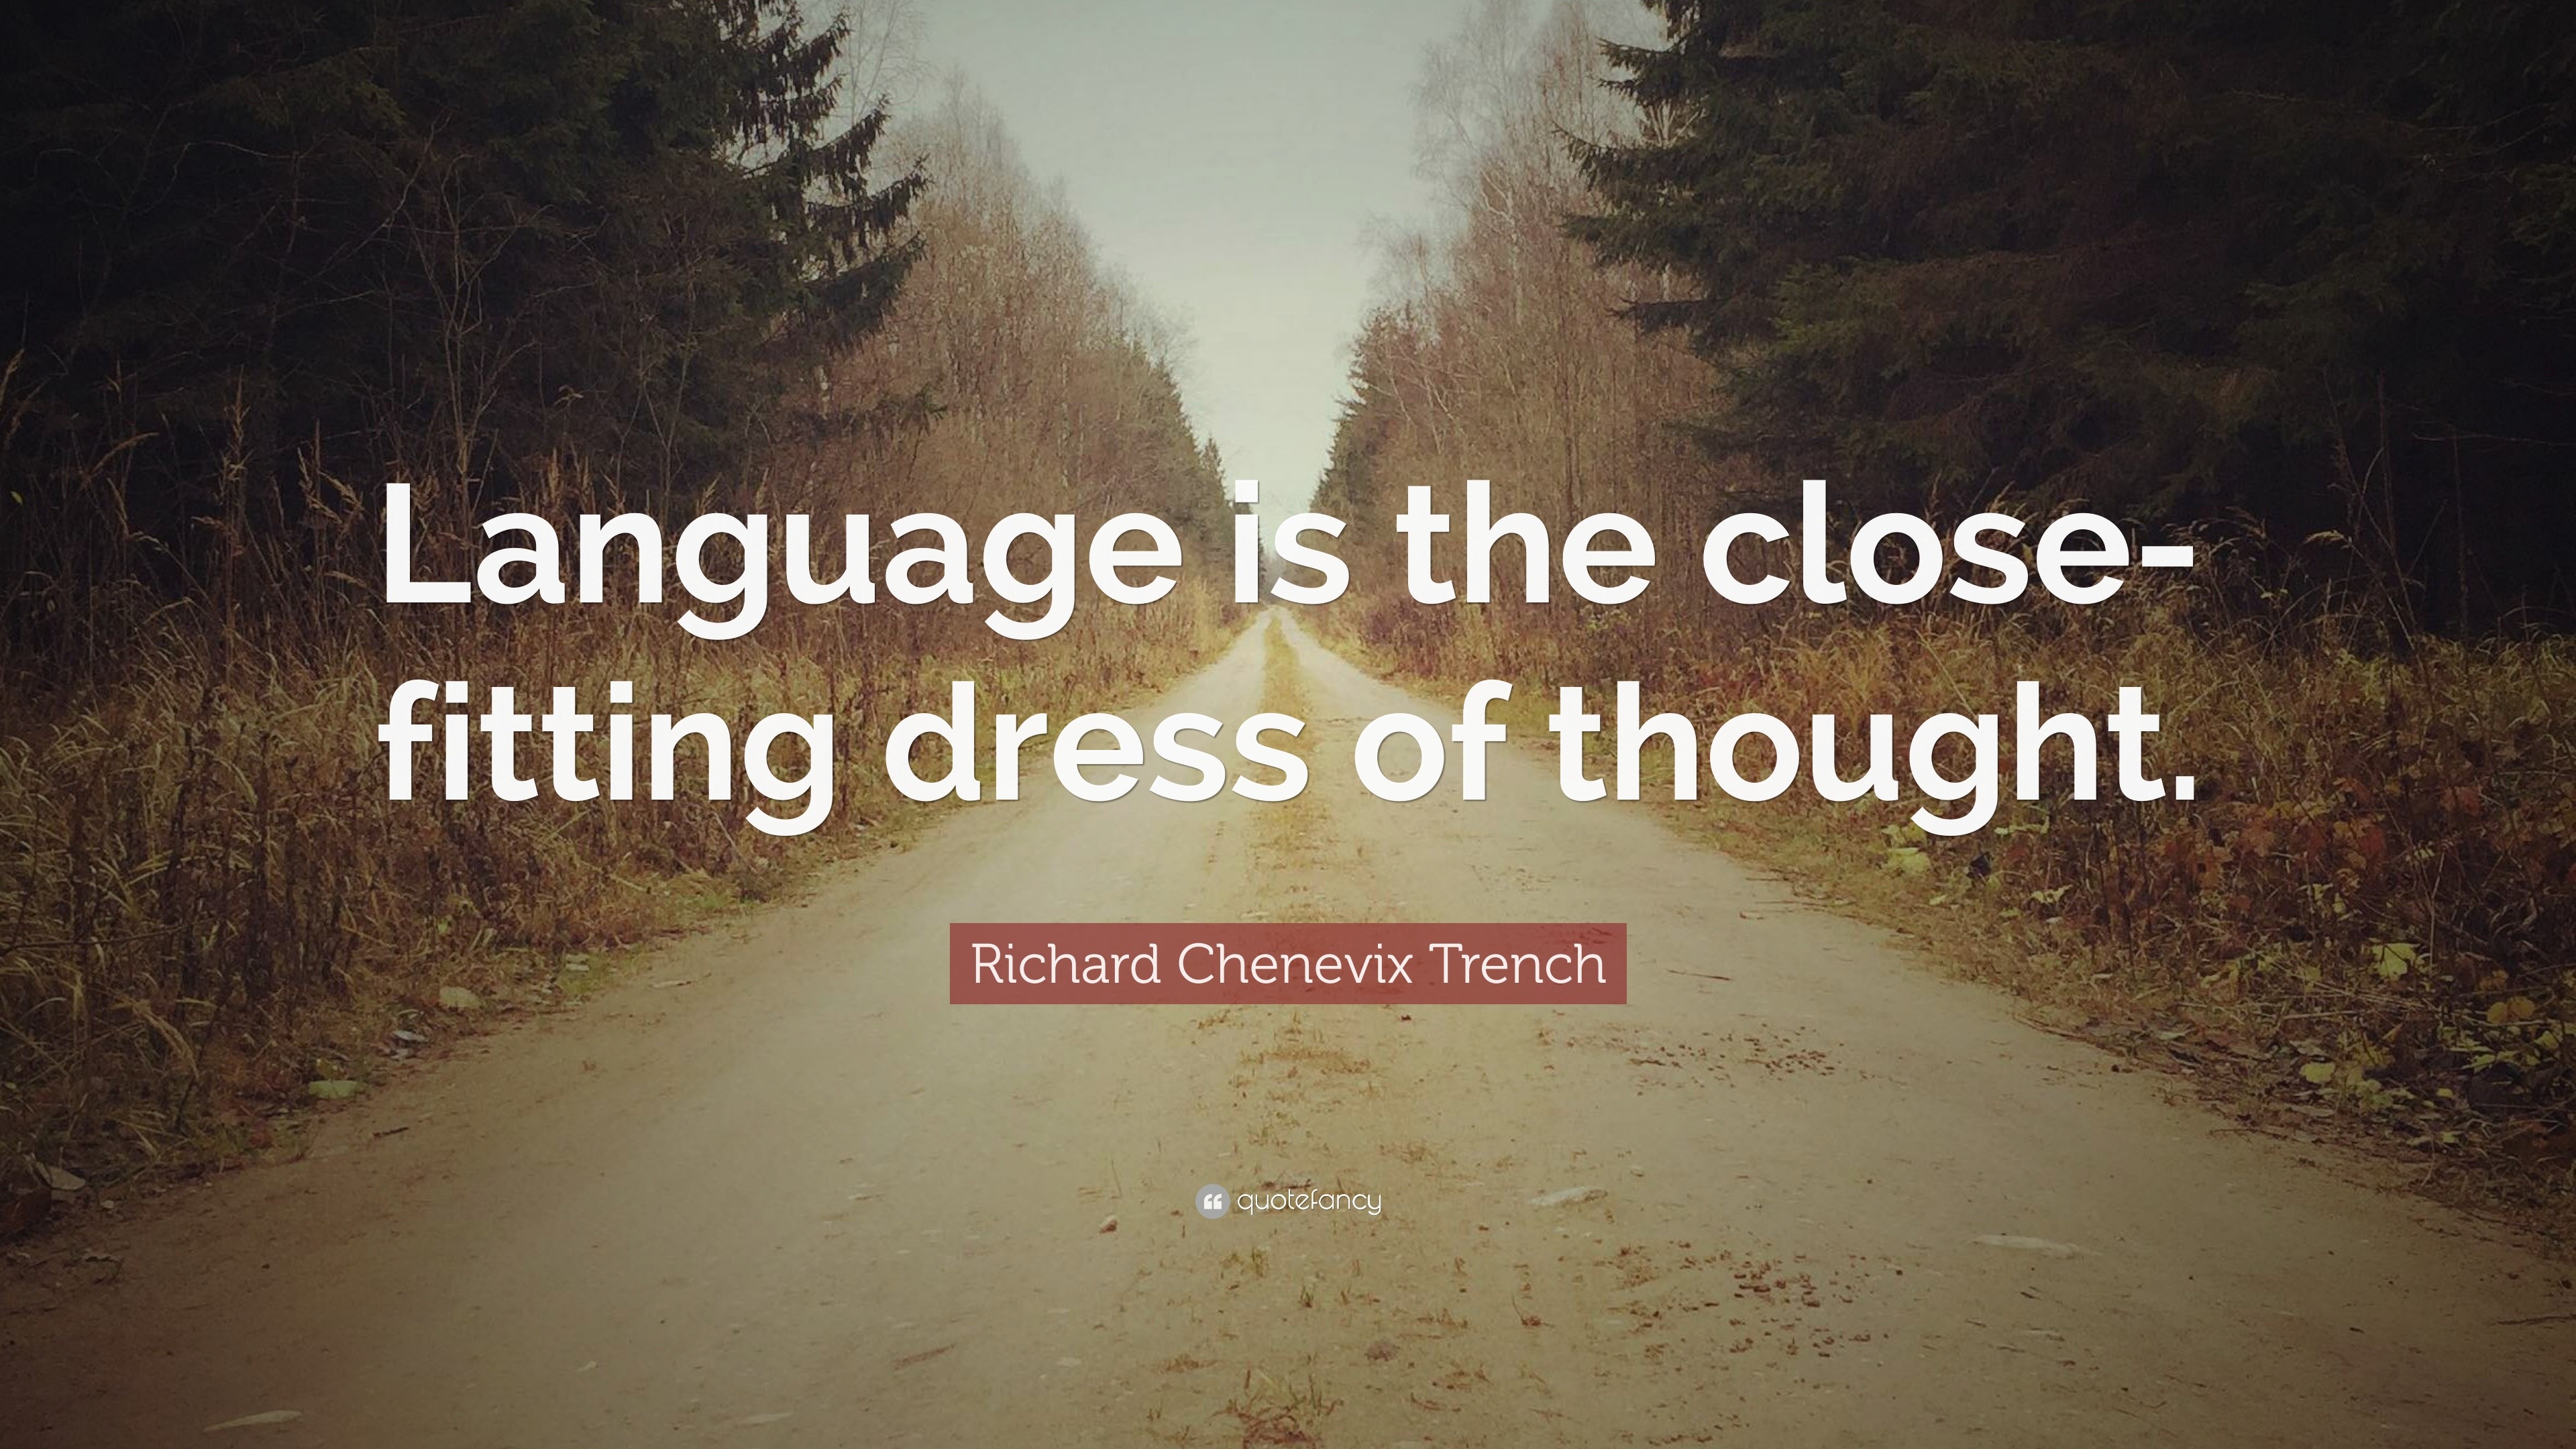 1398670 Richard Chenevix Trench Quote Language is the close fitting dress